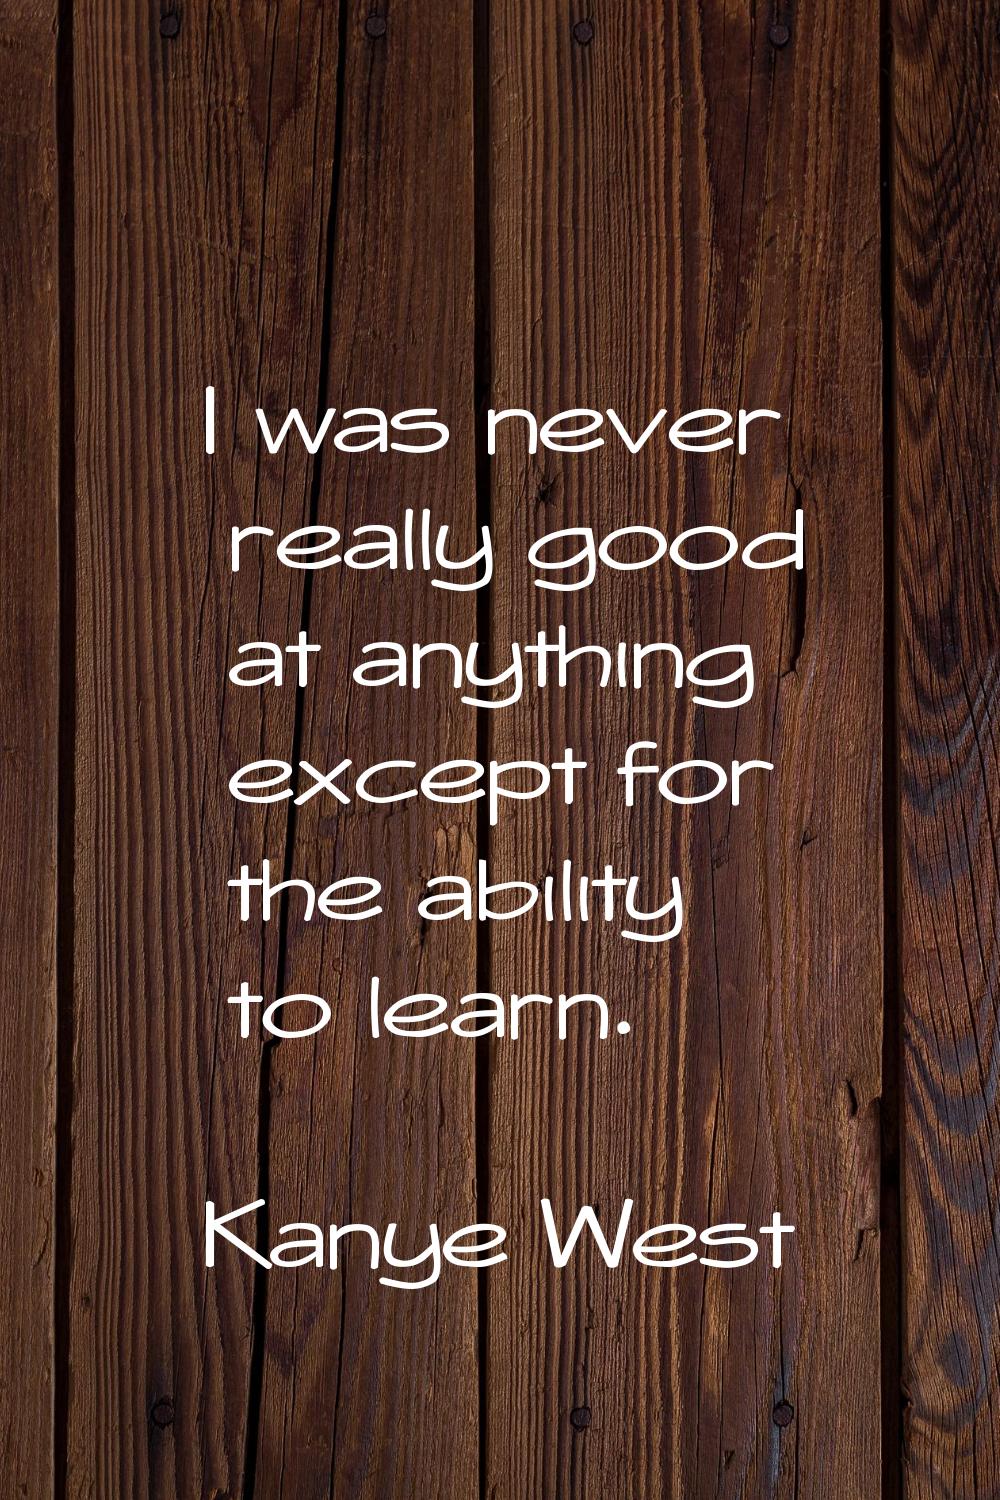 I was never really good at anything except for the ability to learn.